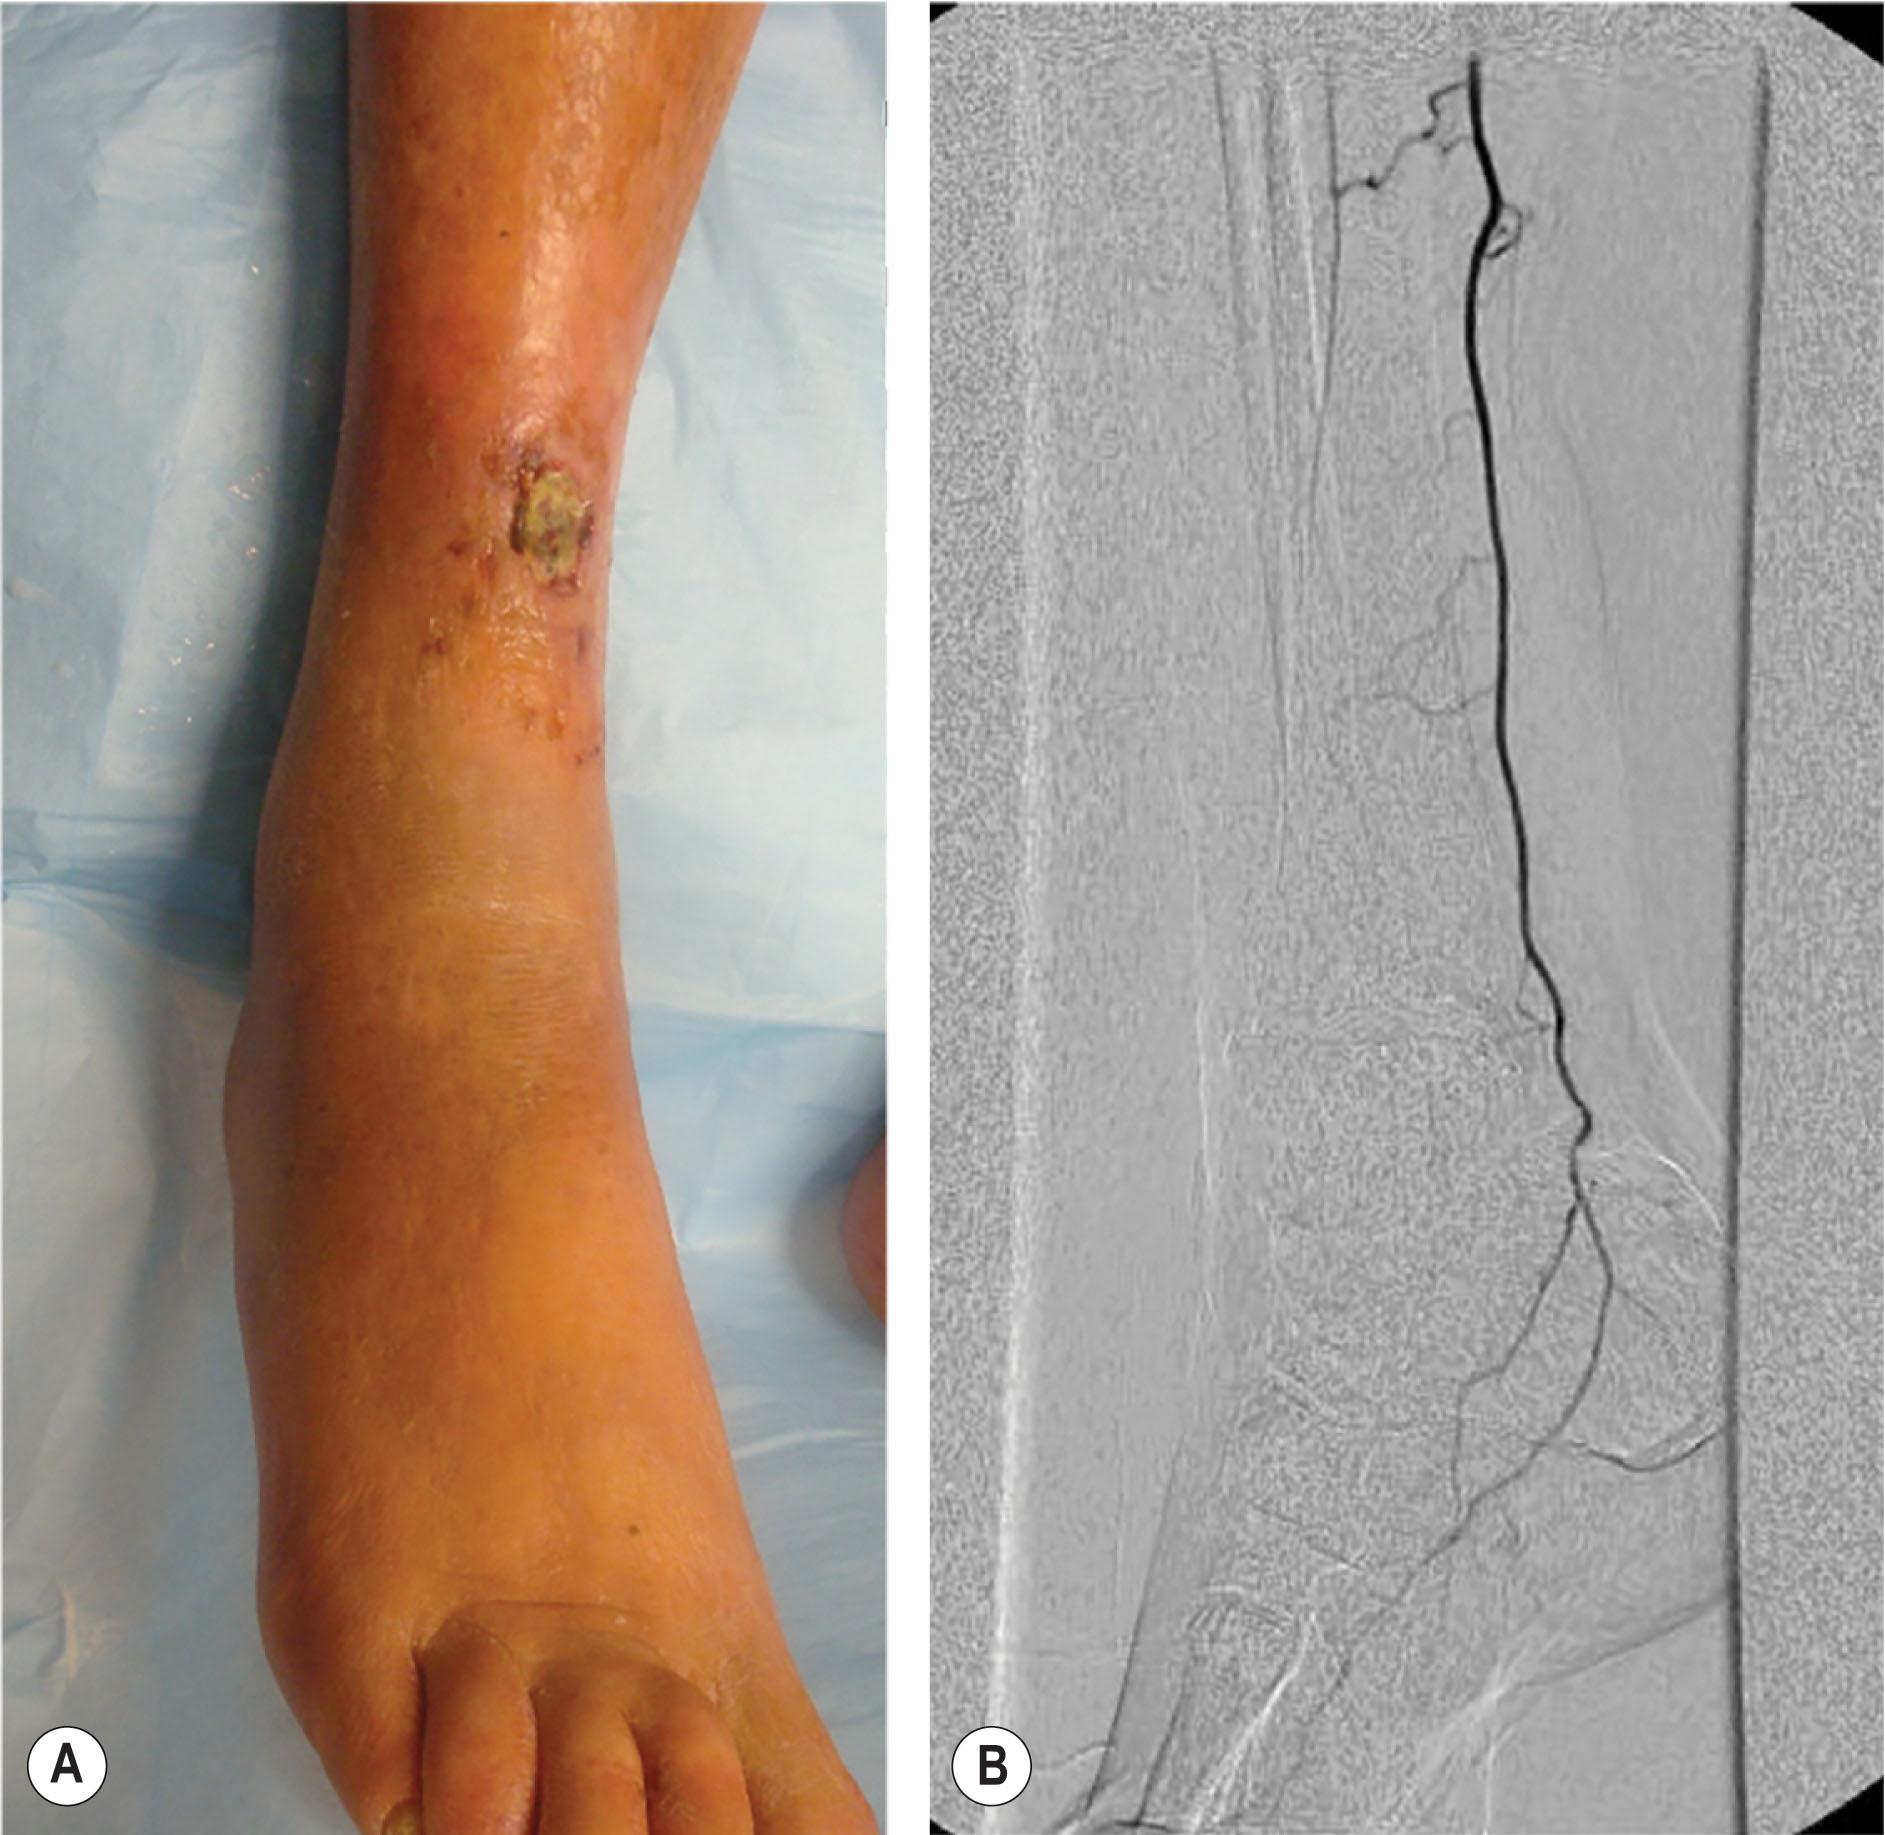 Figure 8.4, (A) An ulcer over the distal anterior tibial artery angiosome that is not healing despite a palpable posterior tibial pulse. (B) Angiogram shows that both the anterior tibial artery and the peroneal artery are occluded.